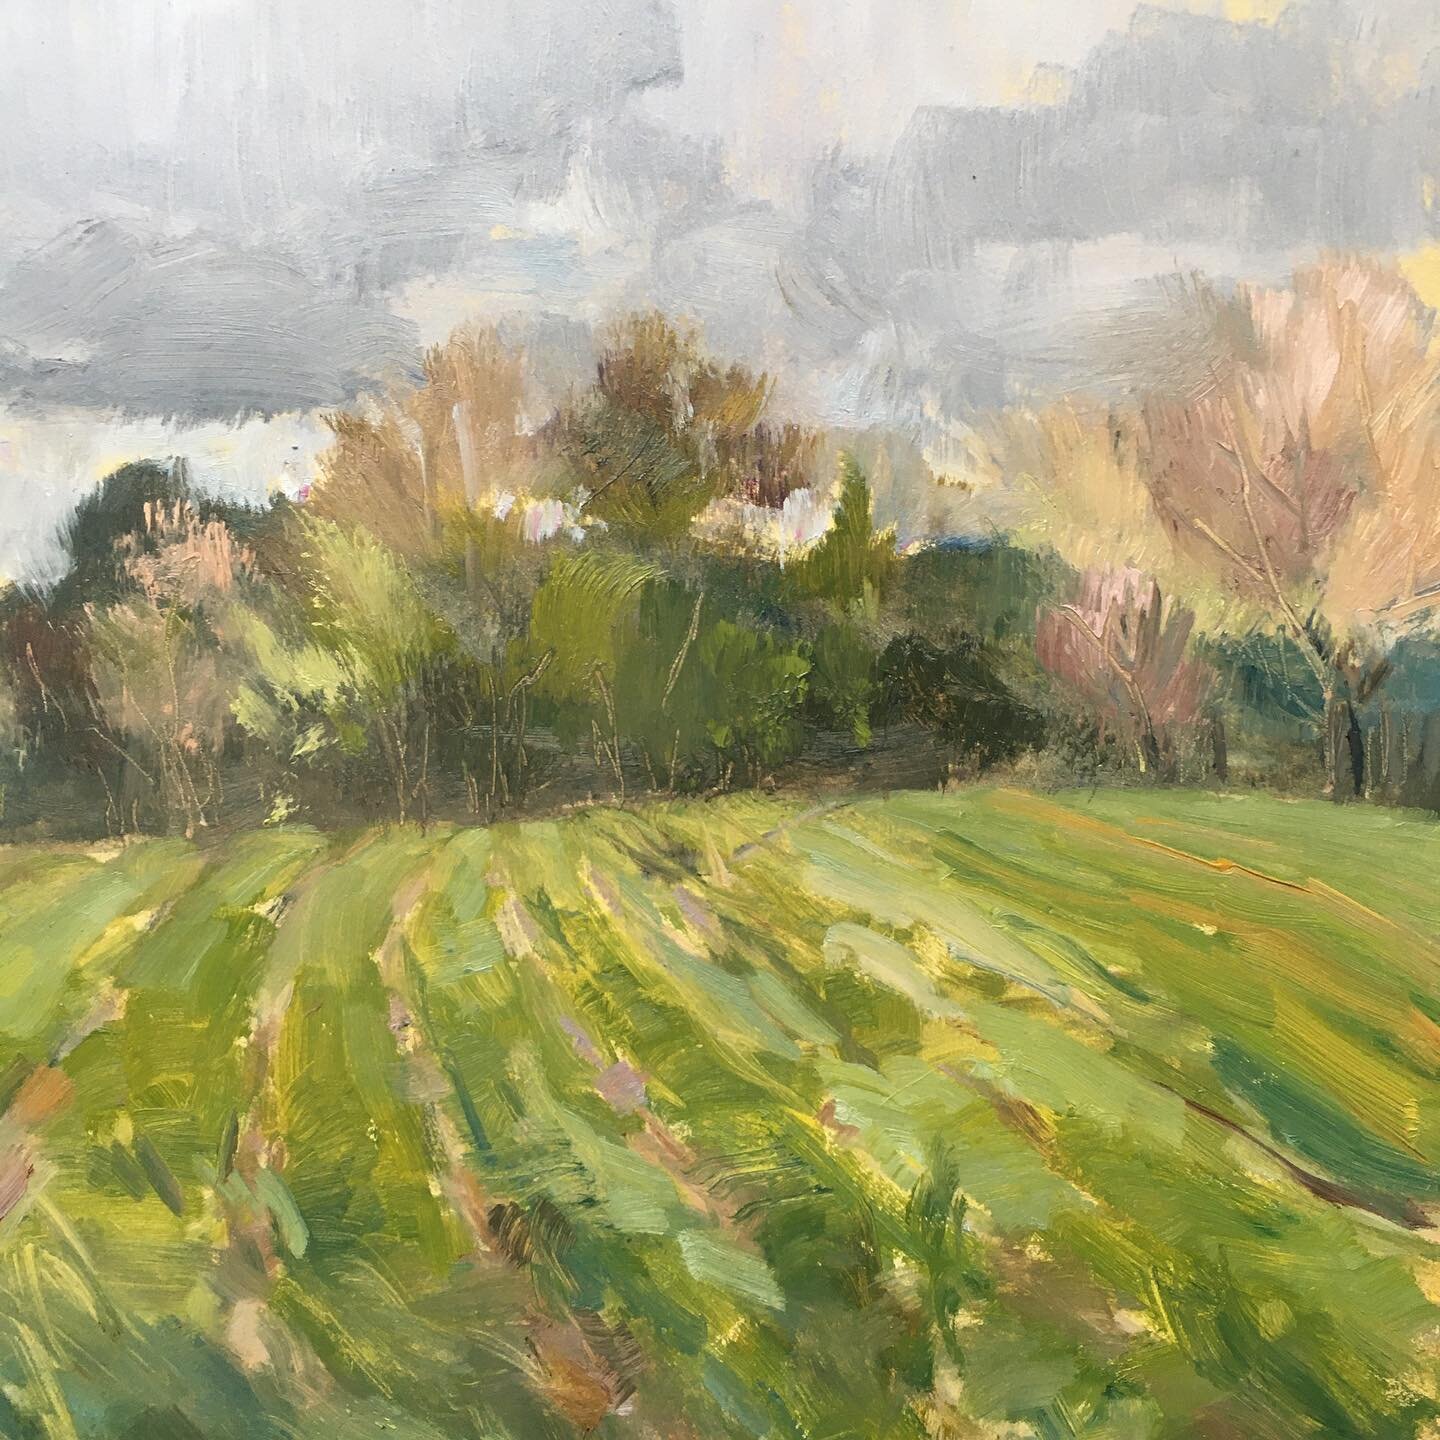 Will it Rain? 8x8 oil on panel. (The answer is yes, by the way. It will rain hard but you will get your gear and yourself into your car with seconds to spare 😅)
Painted by the small field on Inwood Rd behind @ncstatehowlingcow . 

A color stands abr